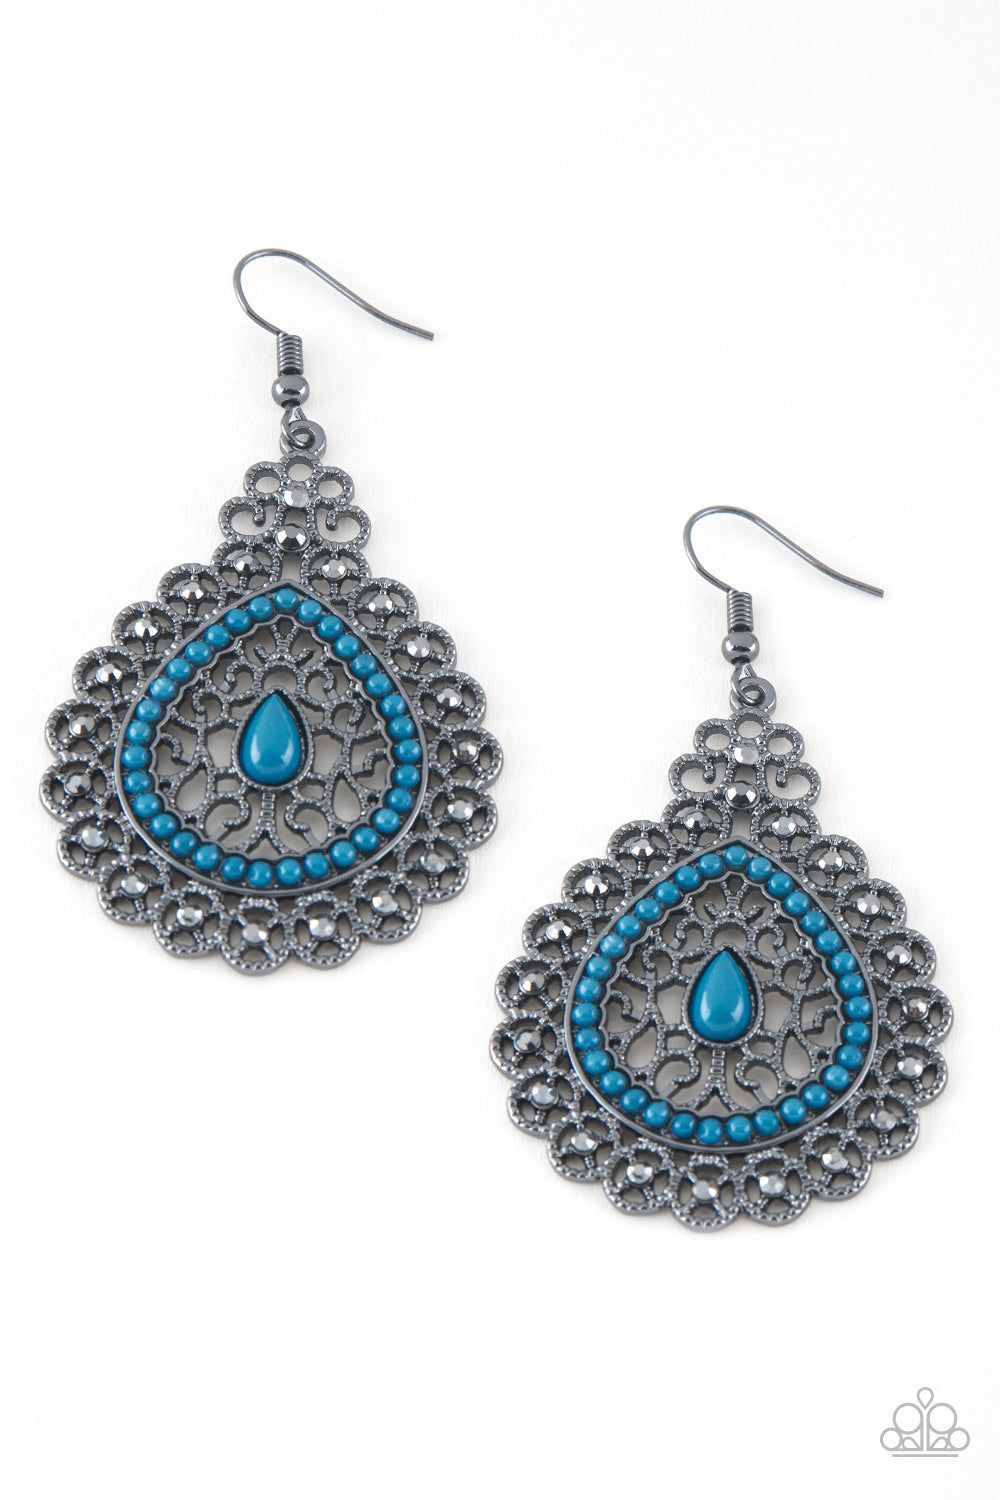 Carnival Courtesan Blue Earring - Paparazzi Accessories  Regal gunmetal filigree climbs a teardrop shaped frame, coalescing into a glistening frame. Dainty blue beads adorn the center of the frame, while glittery hematite rhinestones embellish the outer frame for a refined finish. Earring attaches to a standard fishhook fitting.  All Paparazzi Accessories are lead free and nickel free!  Sold as one pair of earrings.